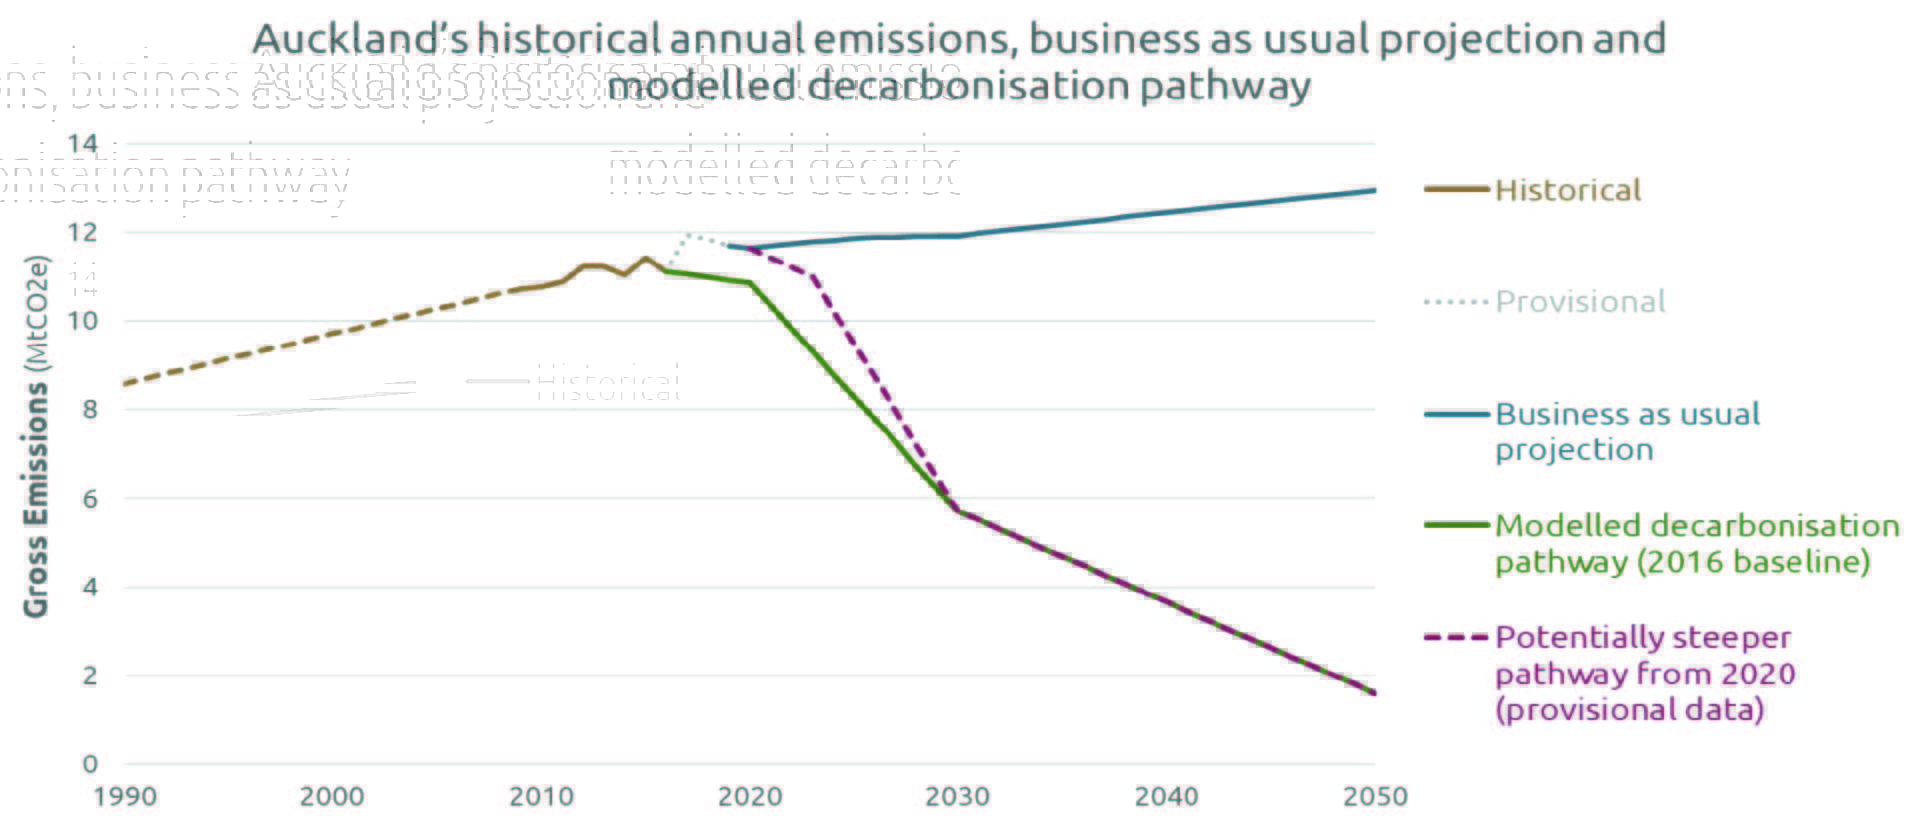 Graph showing Auckland historical annual emissions, business as usual projection and modelled decarbonisation pathway.